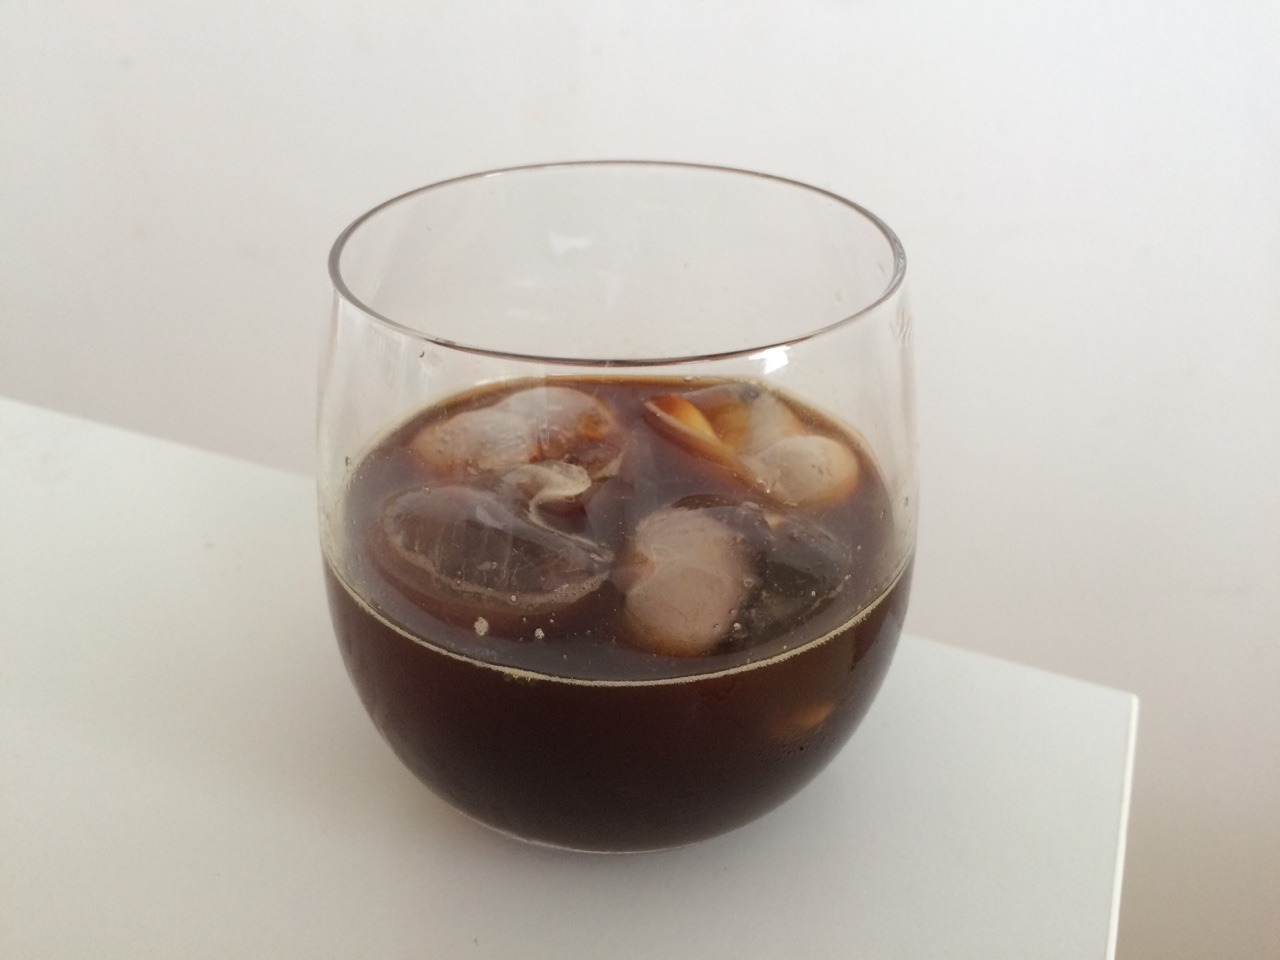 Home made icepresso inspired by cafe esaias in